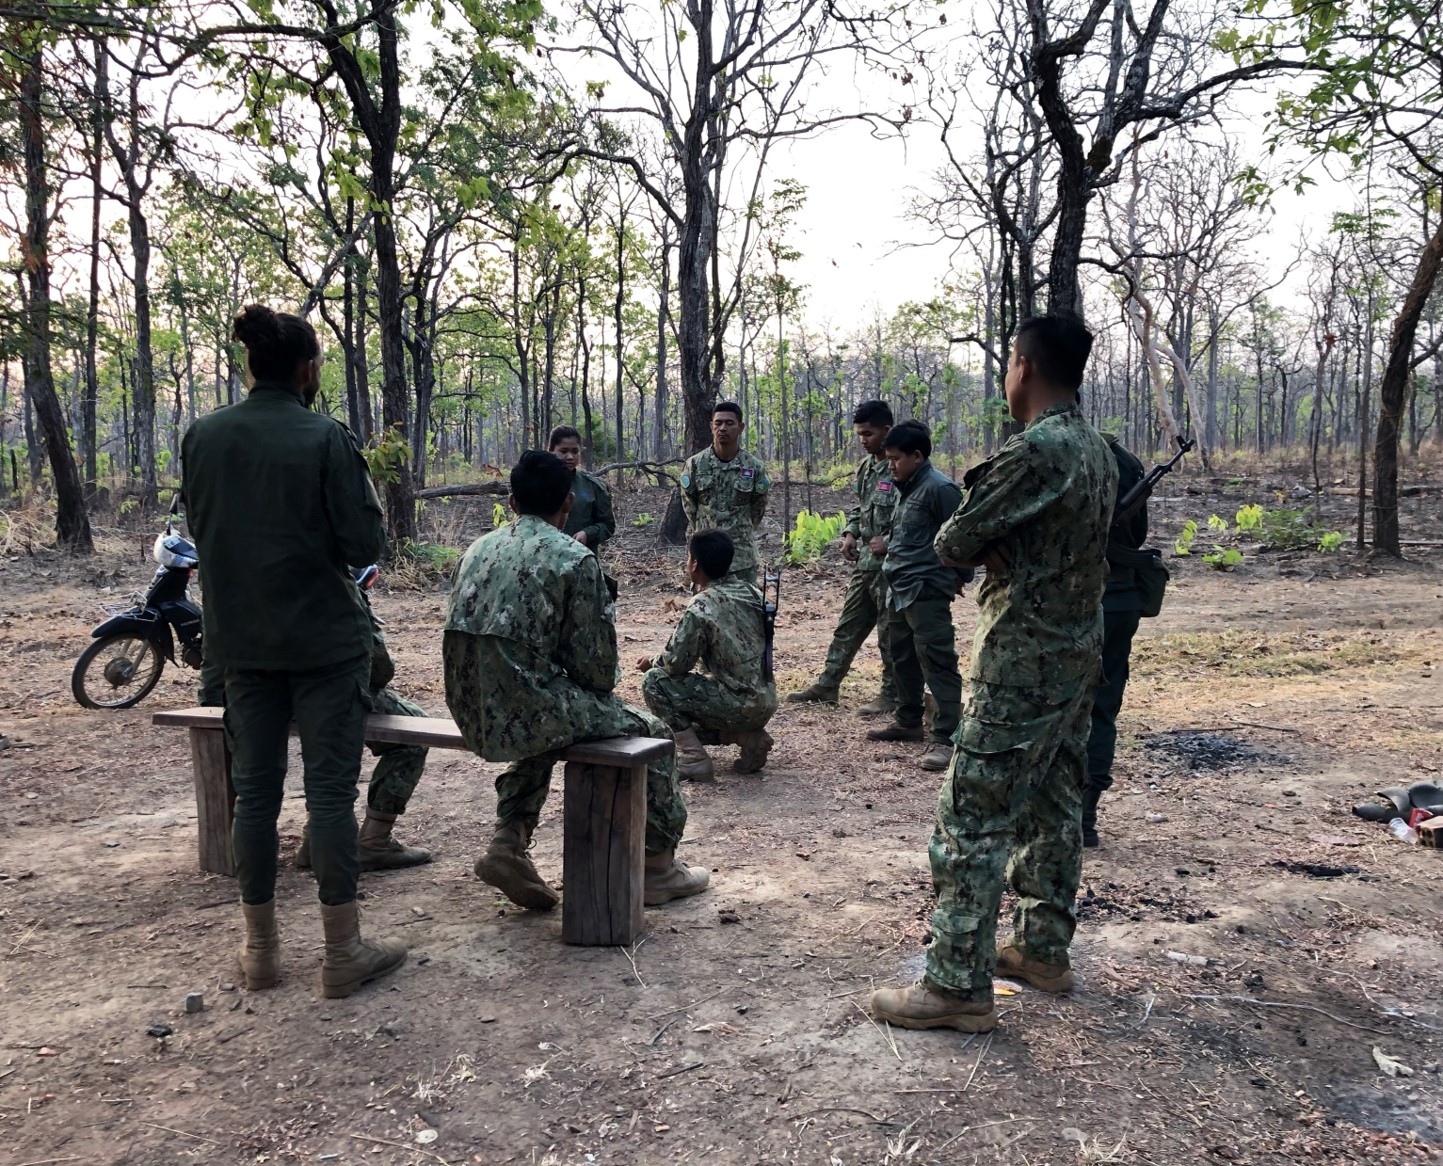 Rangers in Srepok discussing before a patrol